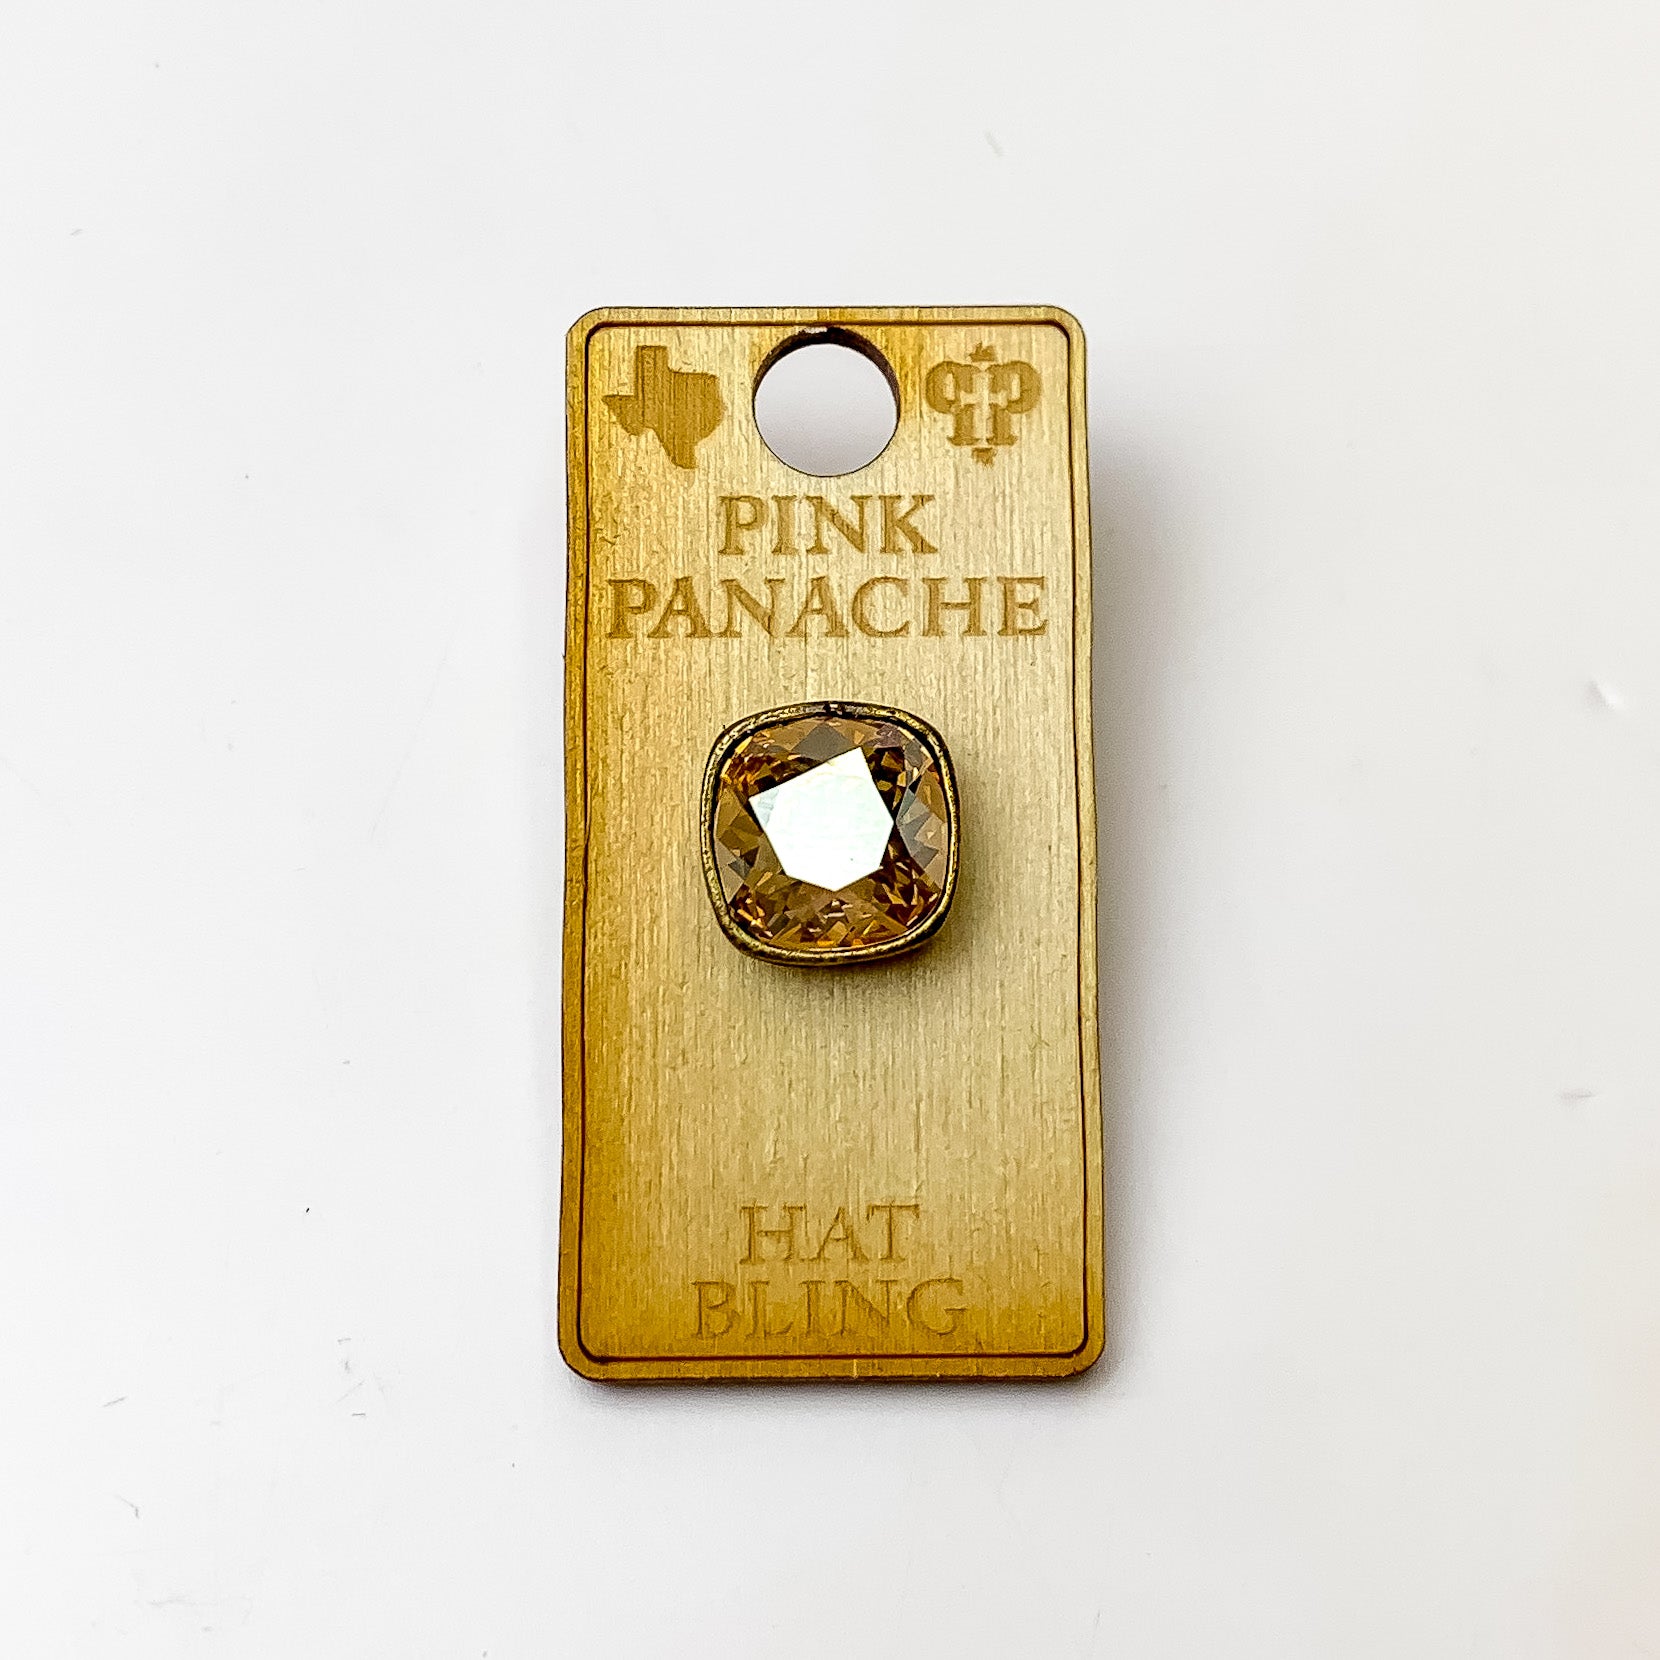 Bronze, square hat pin with a golden shadow cushion cut crystal. This hat pin is pictured on a wooden Pink Panache holder on a white background.